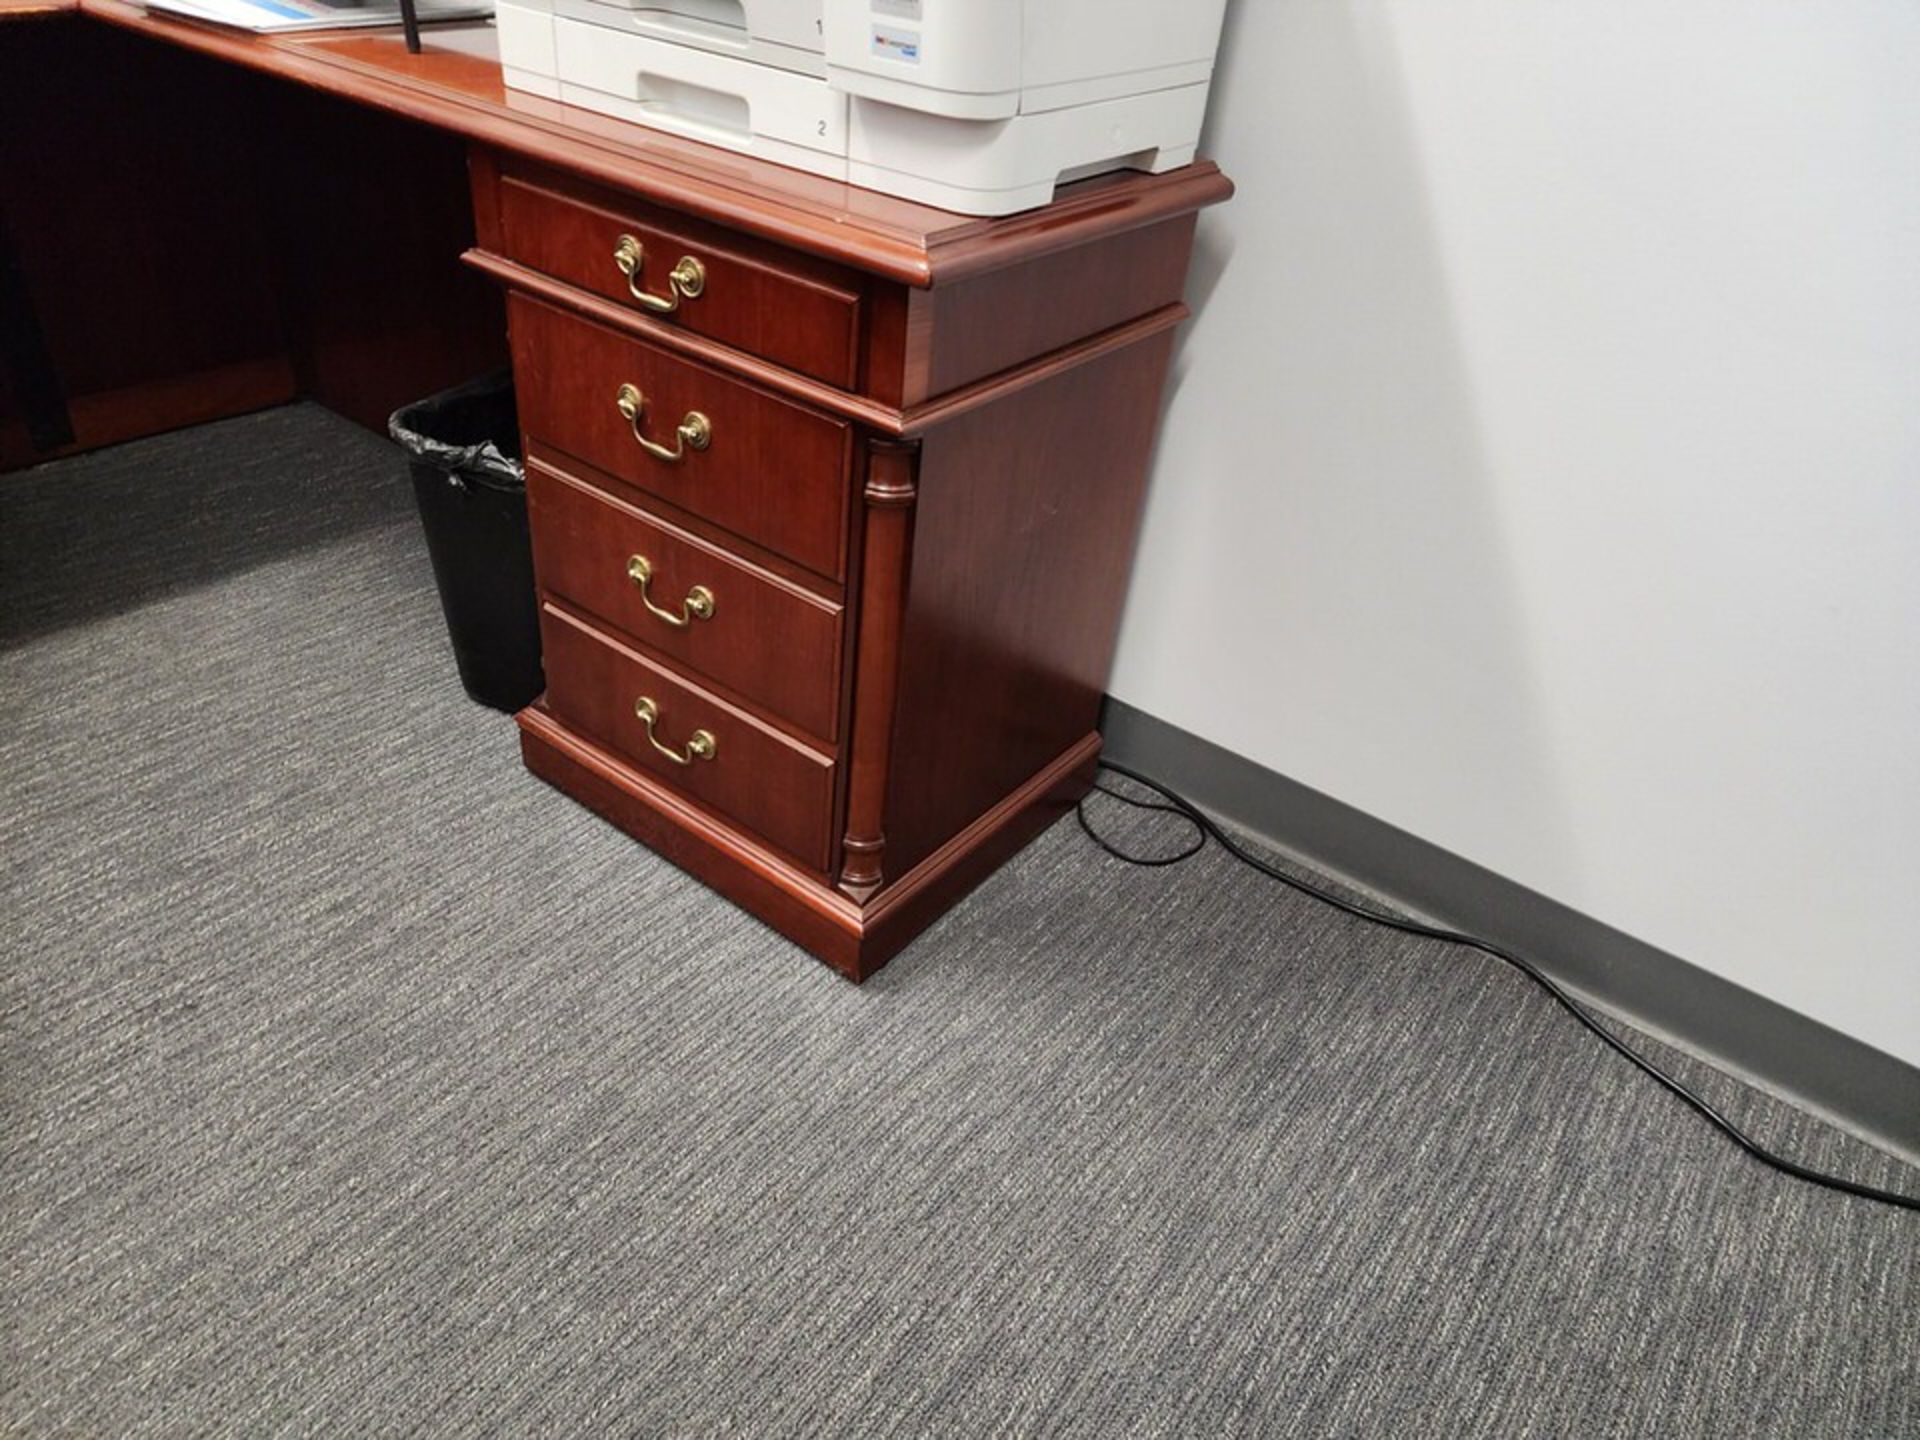 Office Furniture To Include But Not Limited To: Desk, Monitors, Keyboard & Mouse, etc. - Image 7 of 11